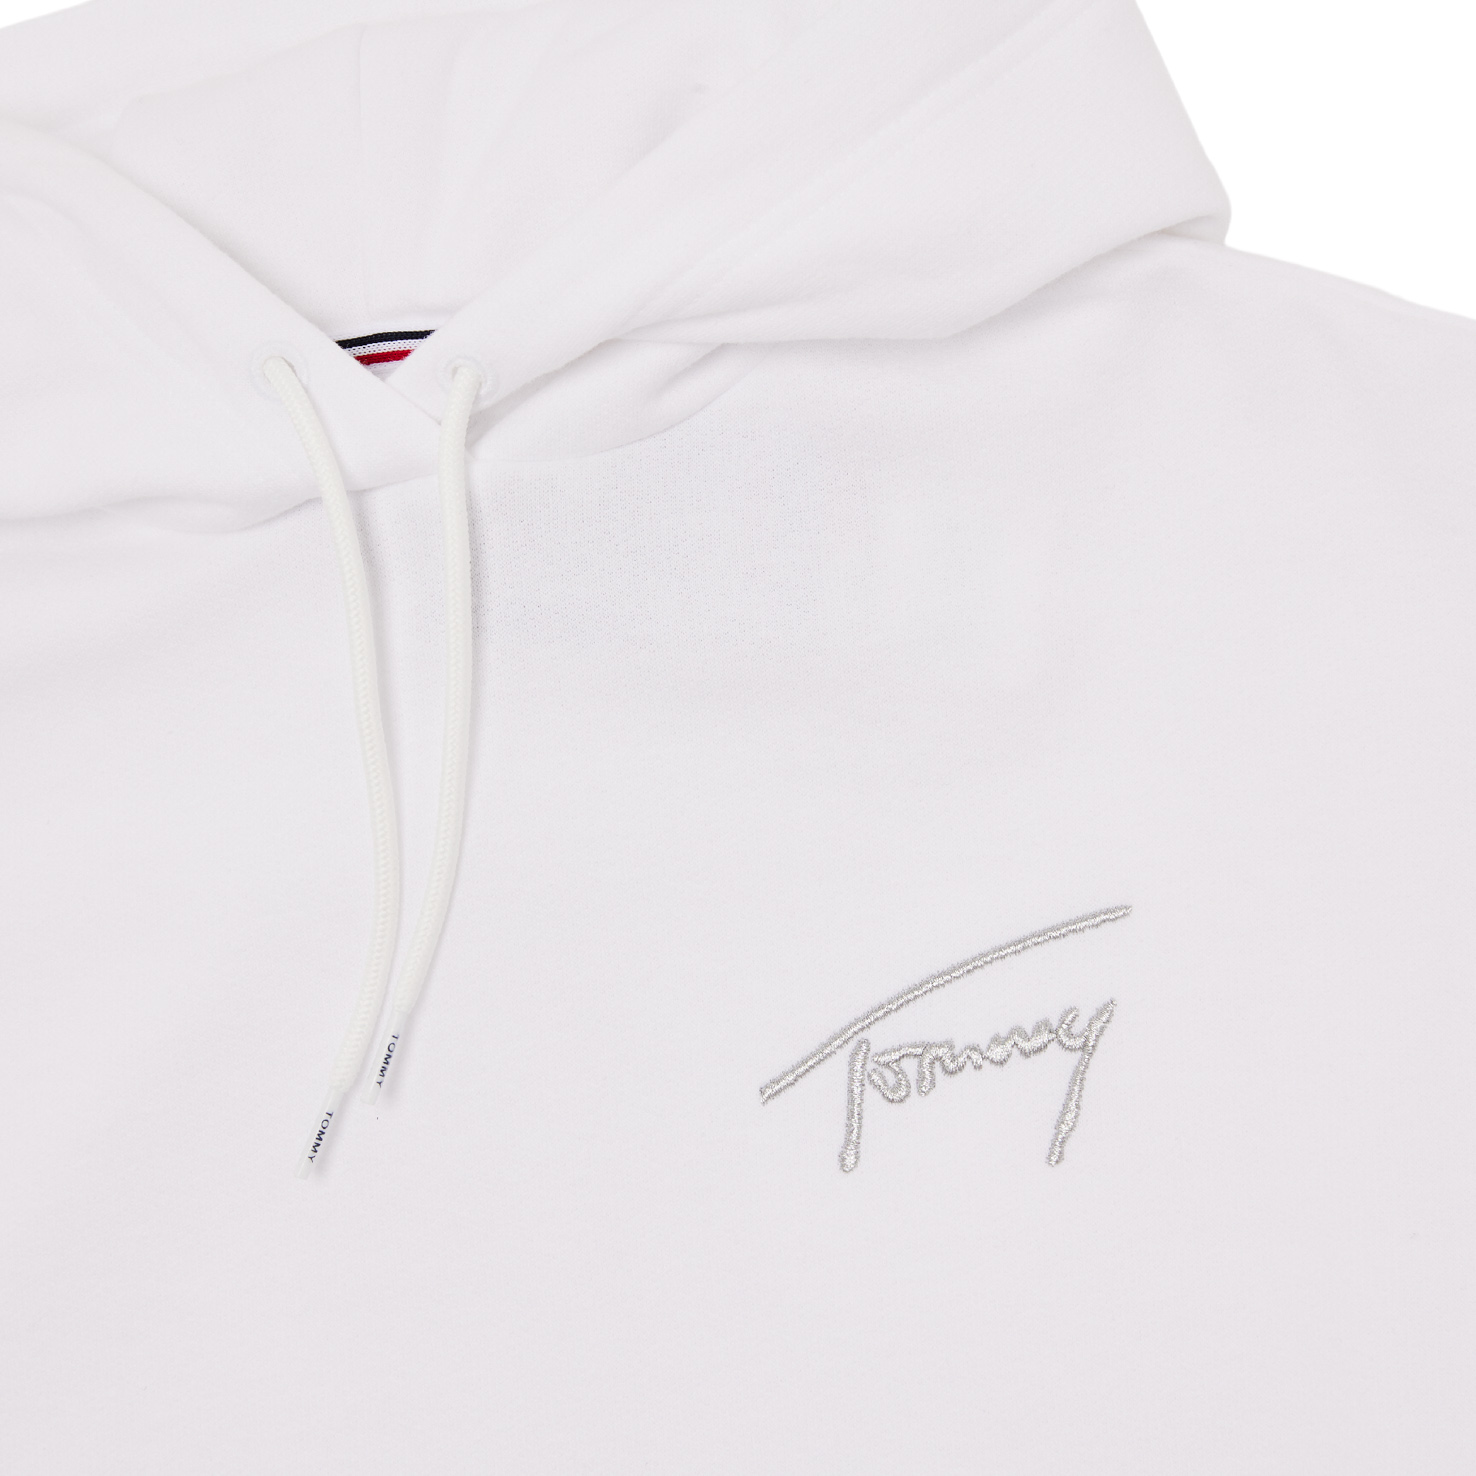 OVERSIZED TOMMY SIGNATURE HOODIE TOMMY JEANS, размер XS, цвет белый TMDW0DW11815 - фото 3